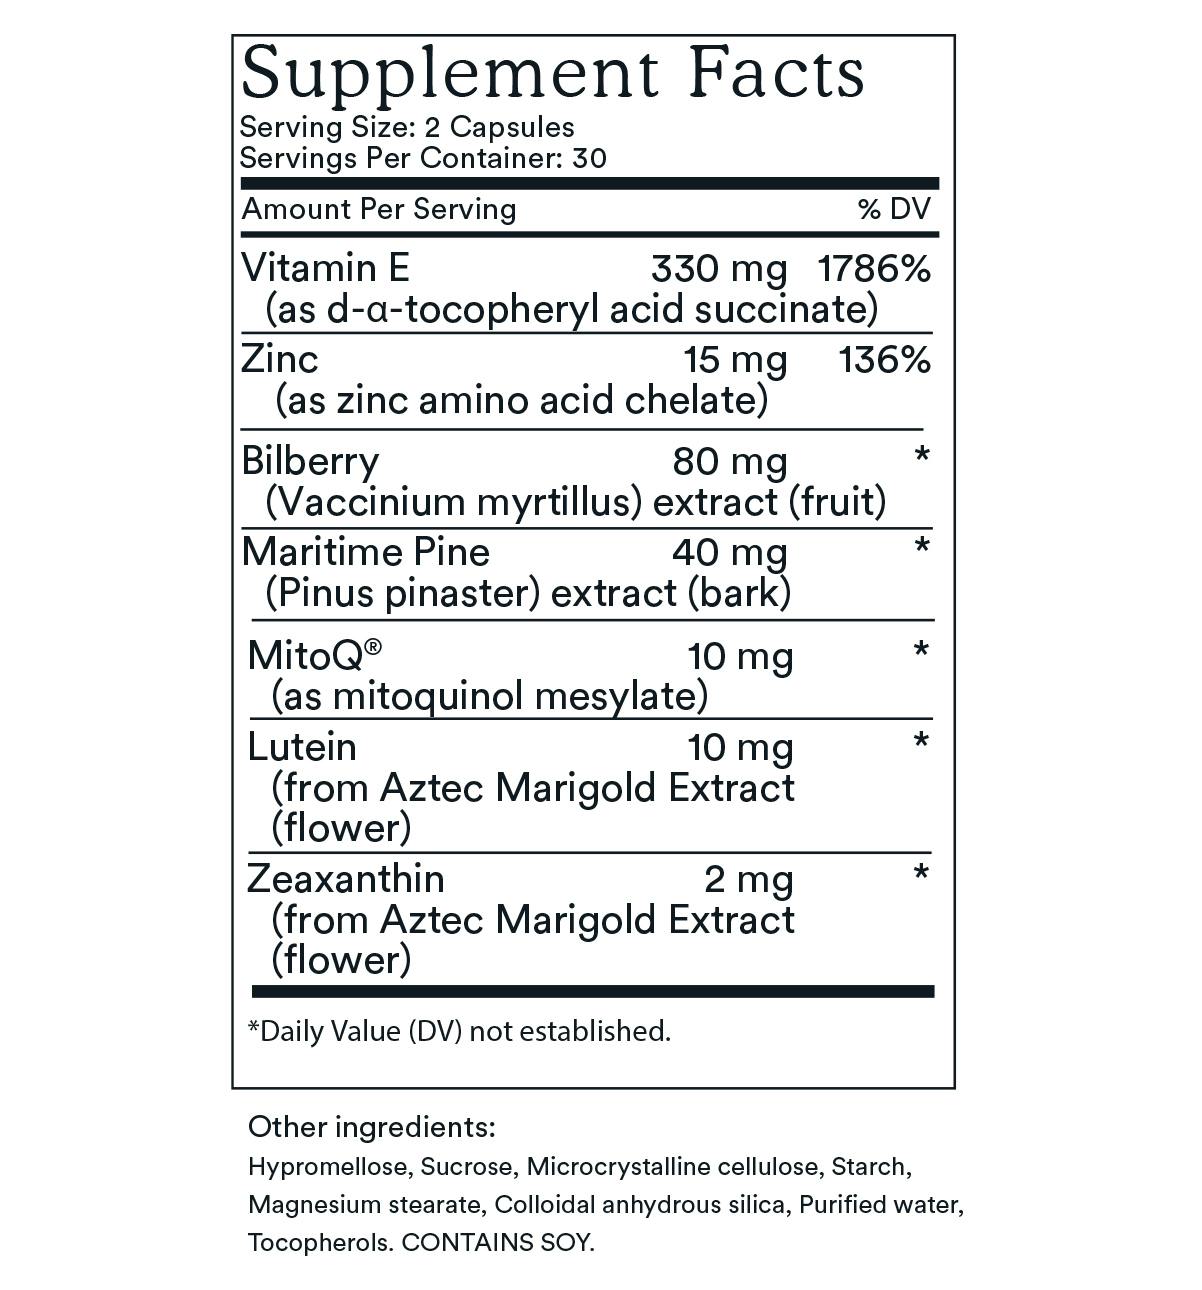 Supplement Facts label for MitoQ +eye